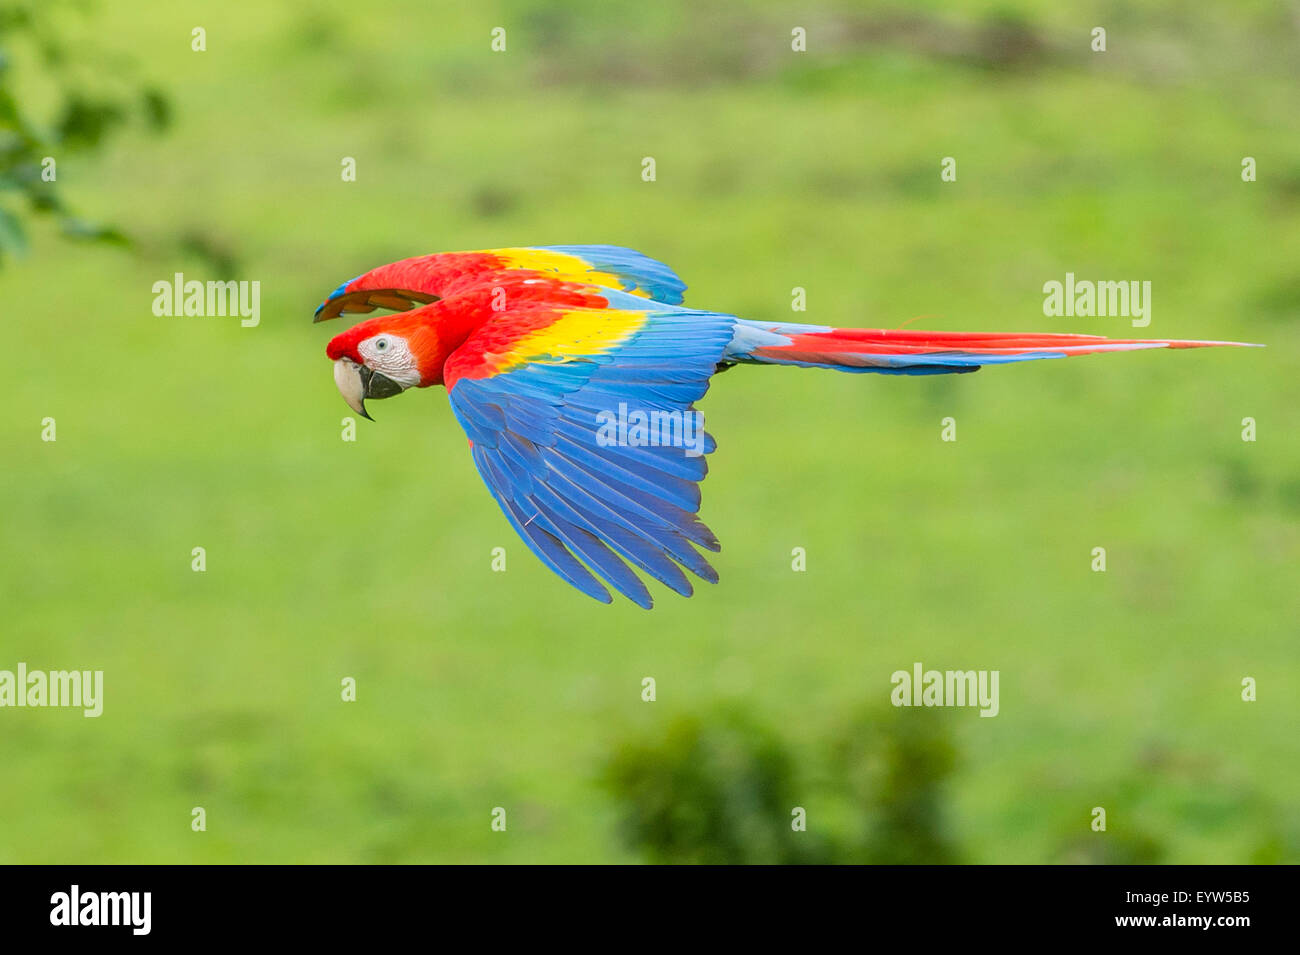 A Scarlet Macaw in flight Stock Photo